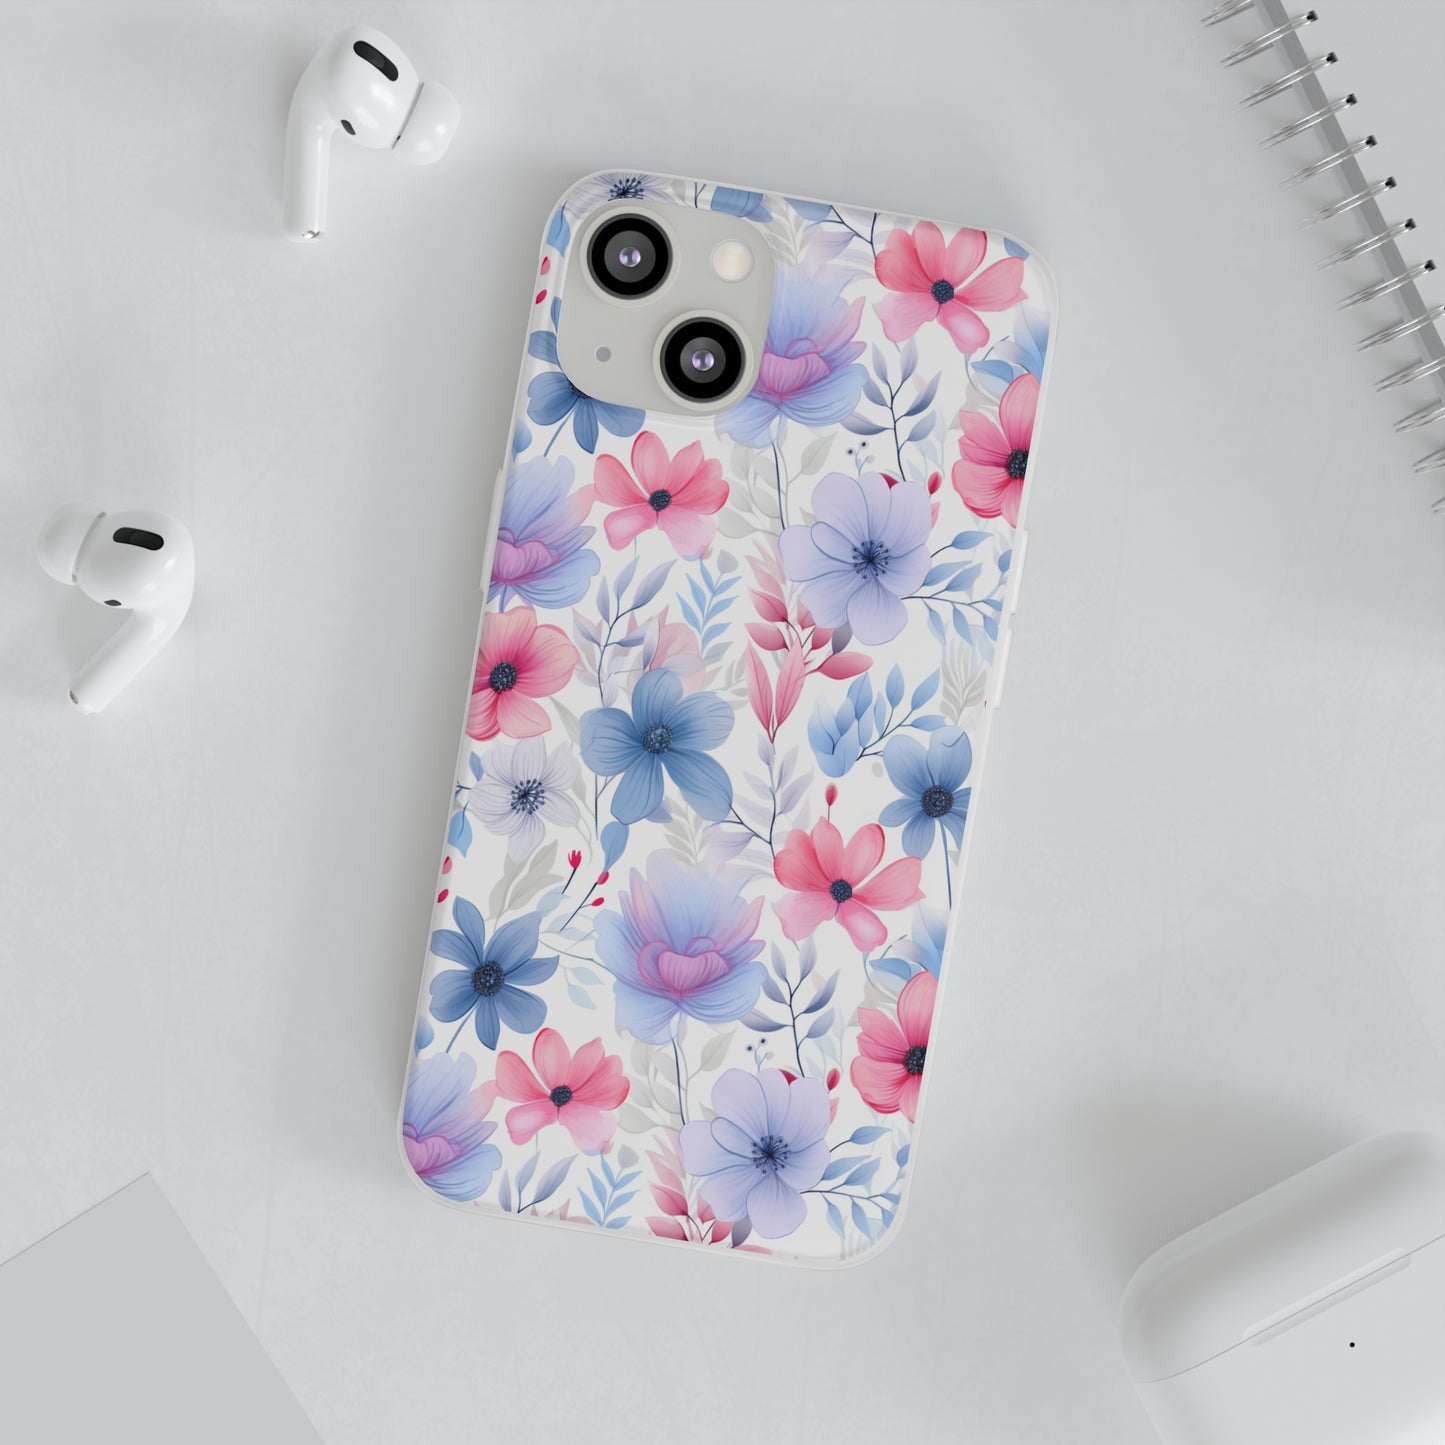 Floral Whispers - Soft Hues of Violets, Pinks, and Blues - Flexi Phone Case Phone Case Pattern Symphony iPhone 13 with gift packaging  